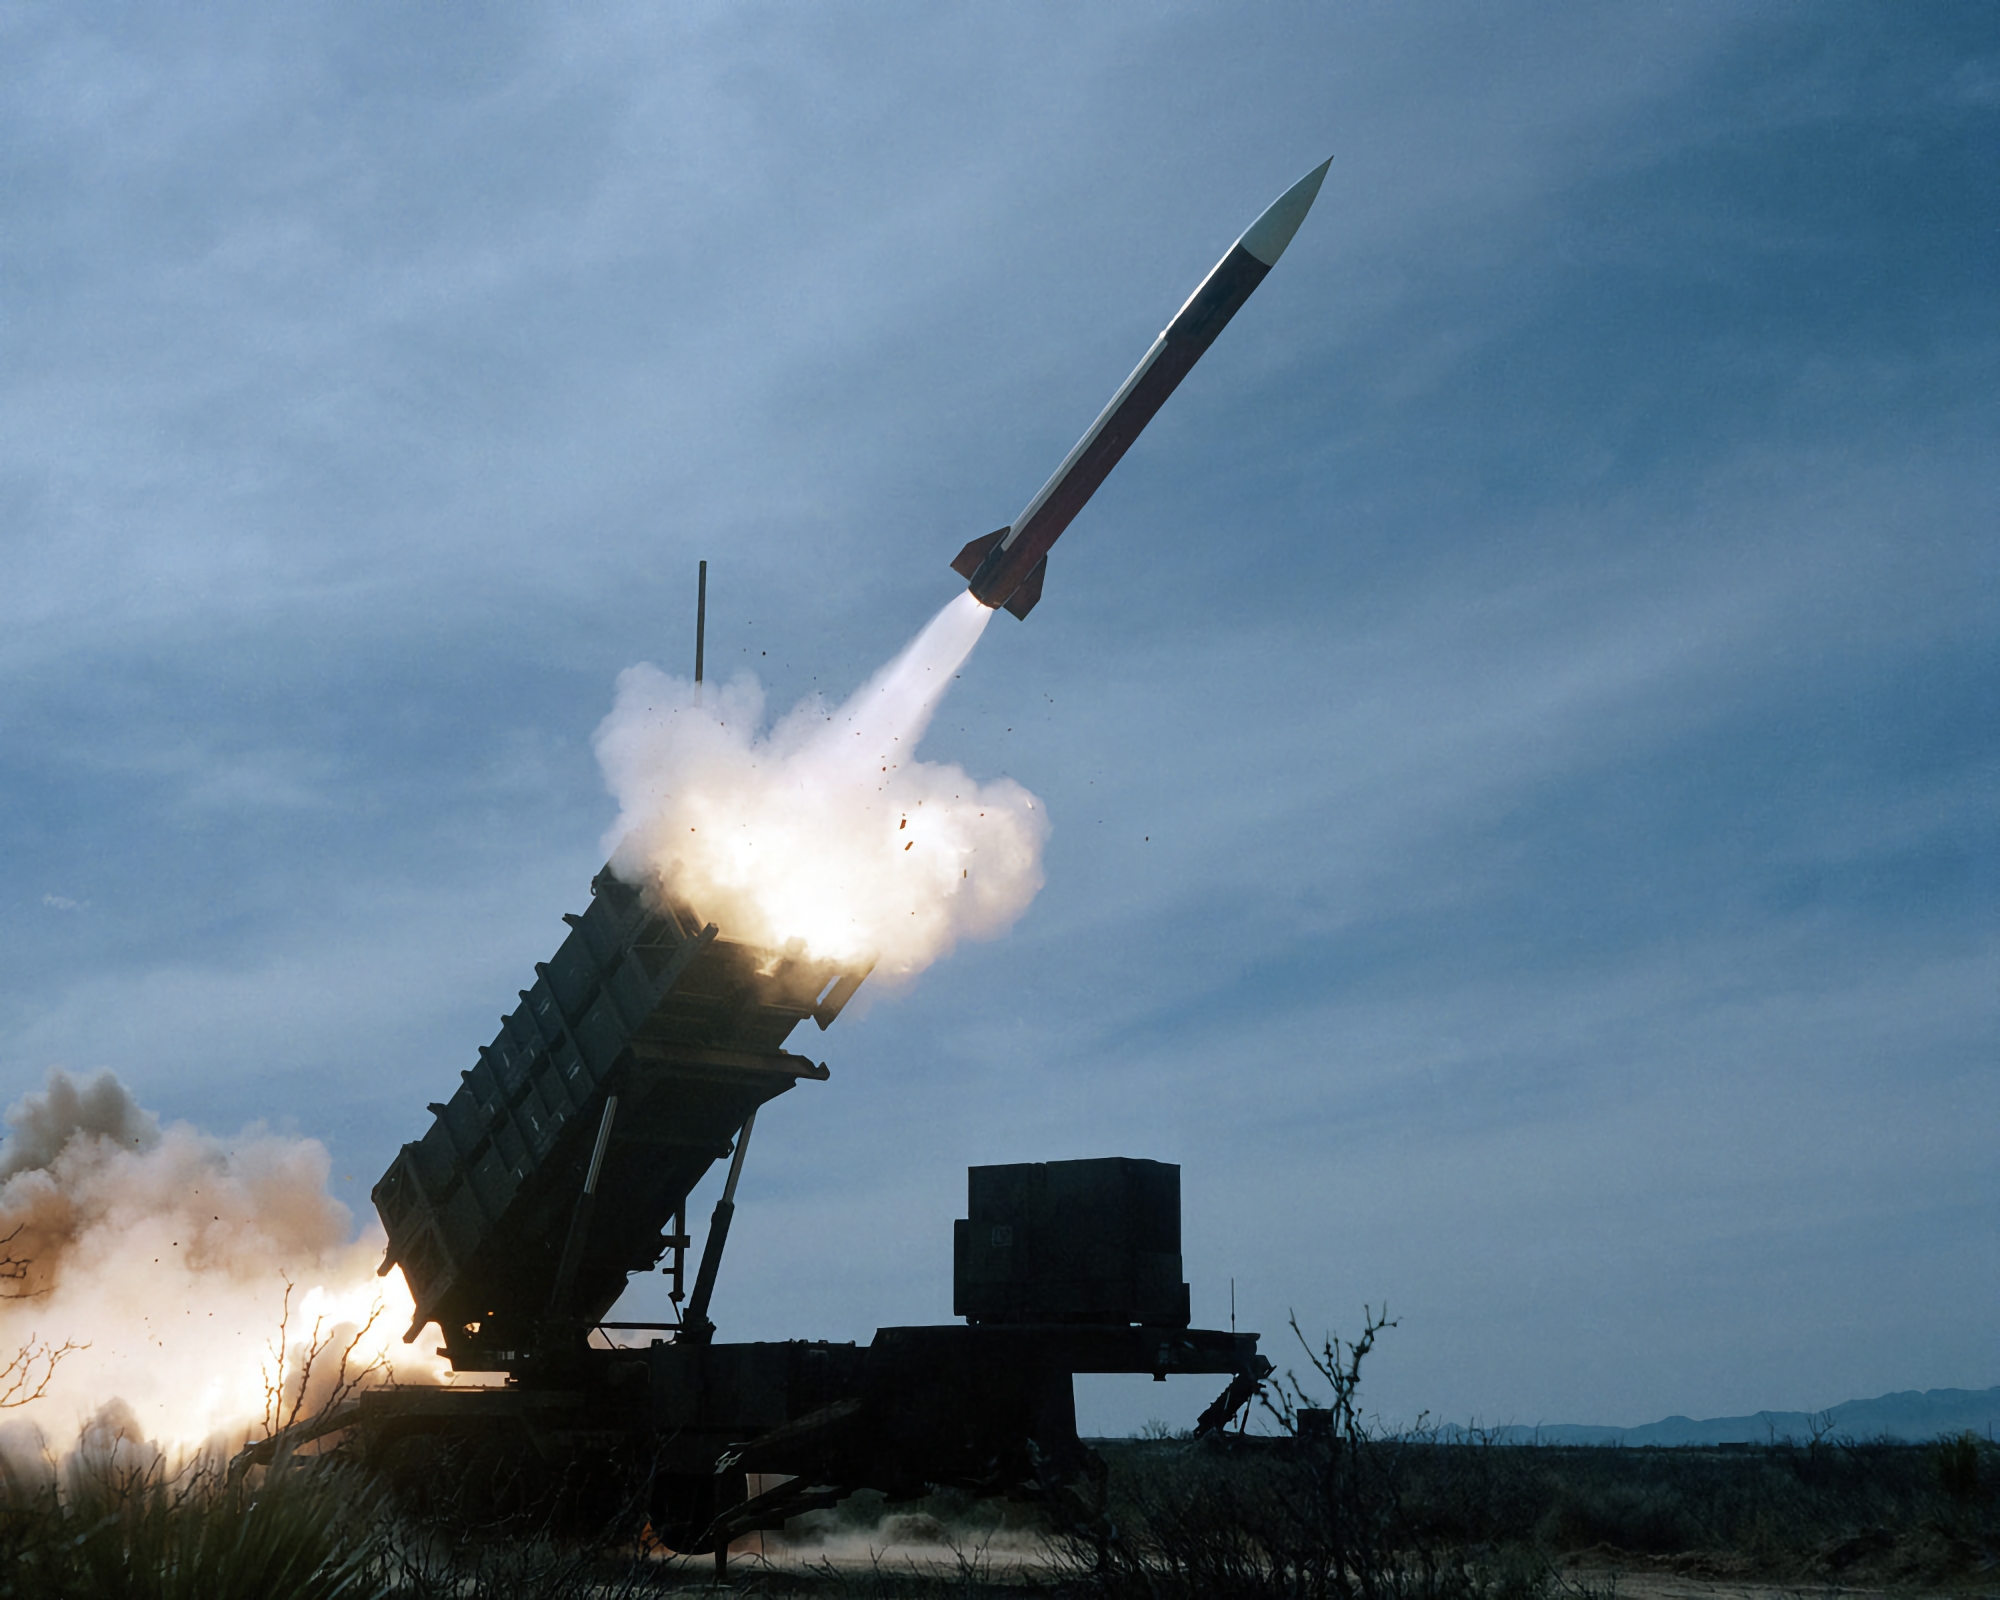 Ukraine can get Patriot in the newest modification of PAC-3, it can shoot down ballistic and cruise missiles